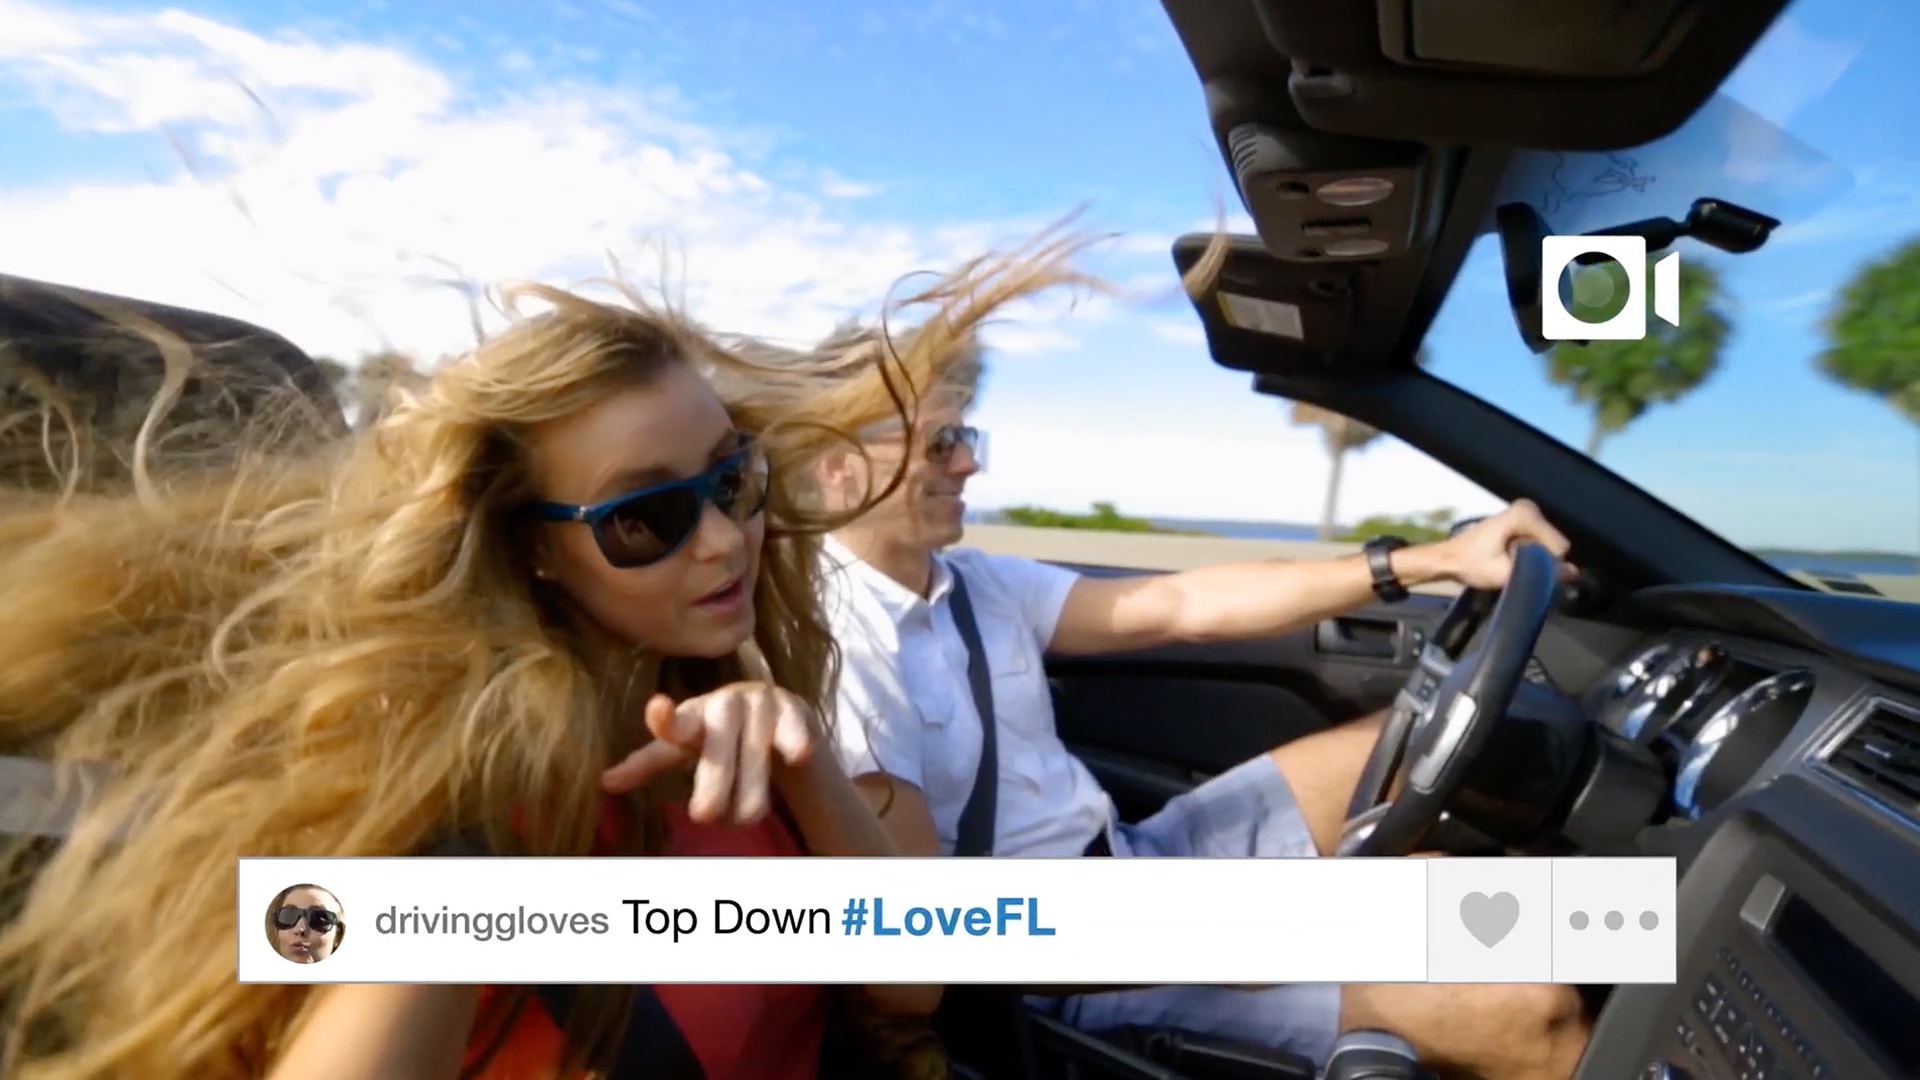 A screen grab of a woman's instagram post. She is the passenger in a top down convertible with her hair flying everywhere. The post says Top Down #LoveFL.